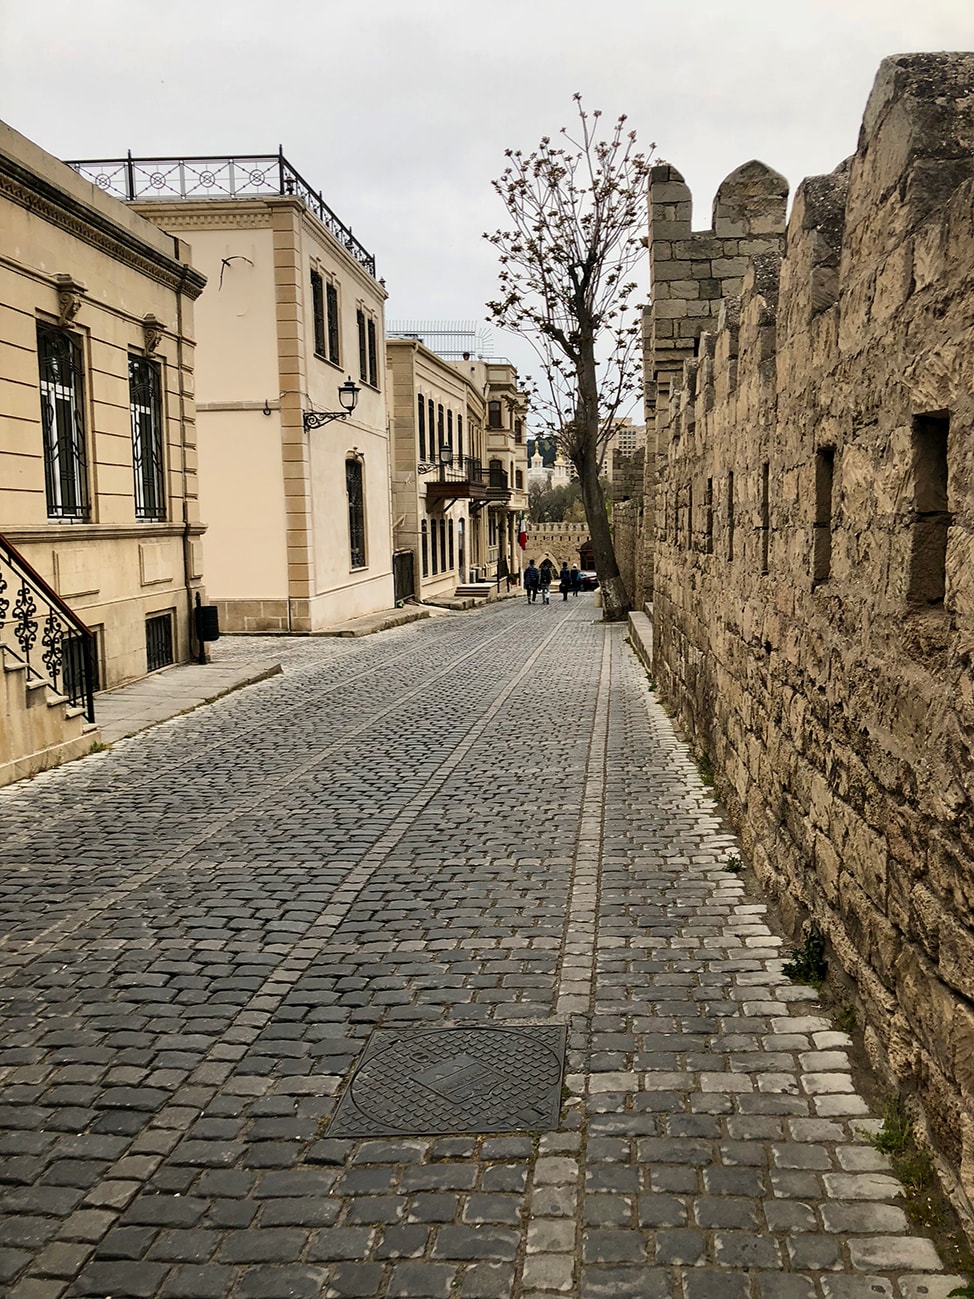 Cobble stone streets lined by brick walls and private homes